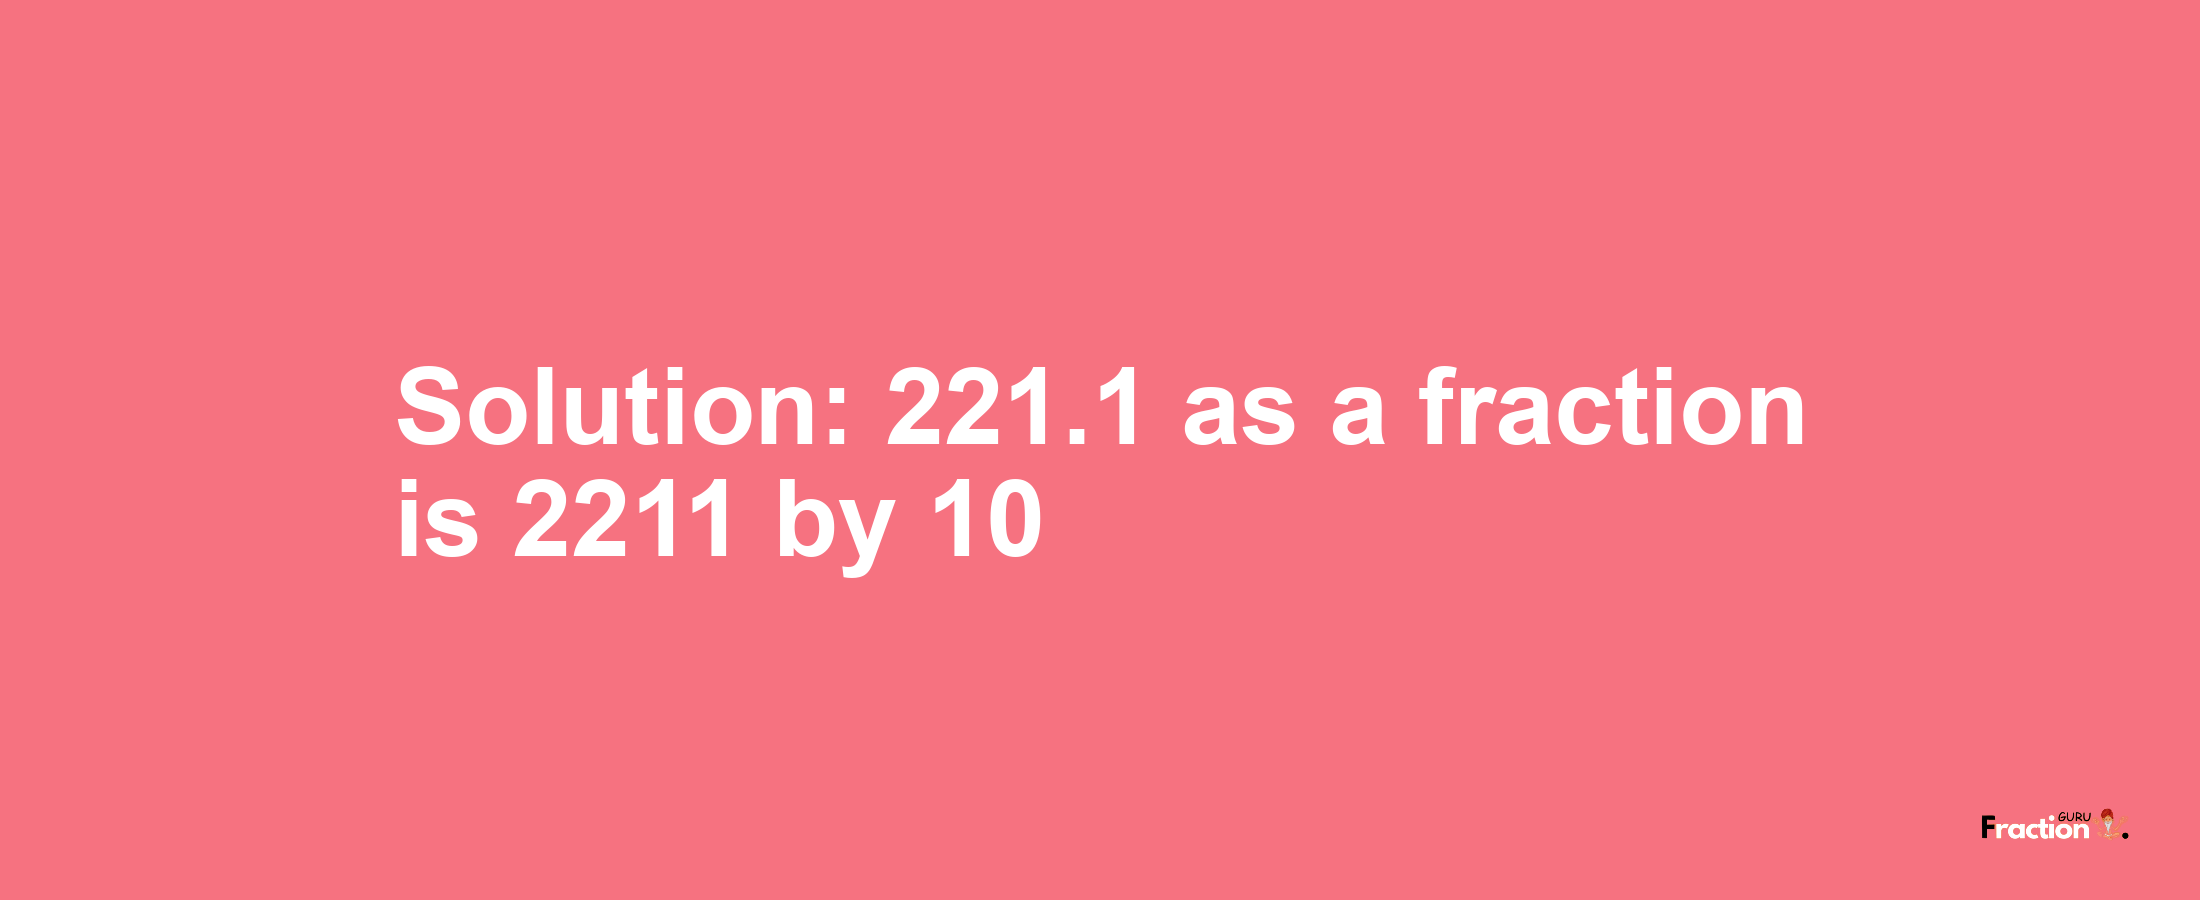 Solution:221.1 as a fraction is 2211/10